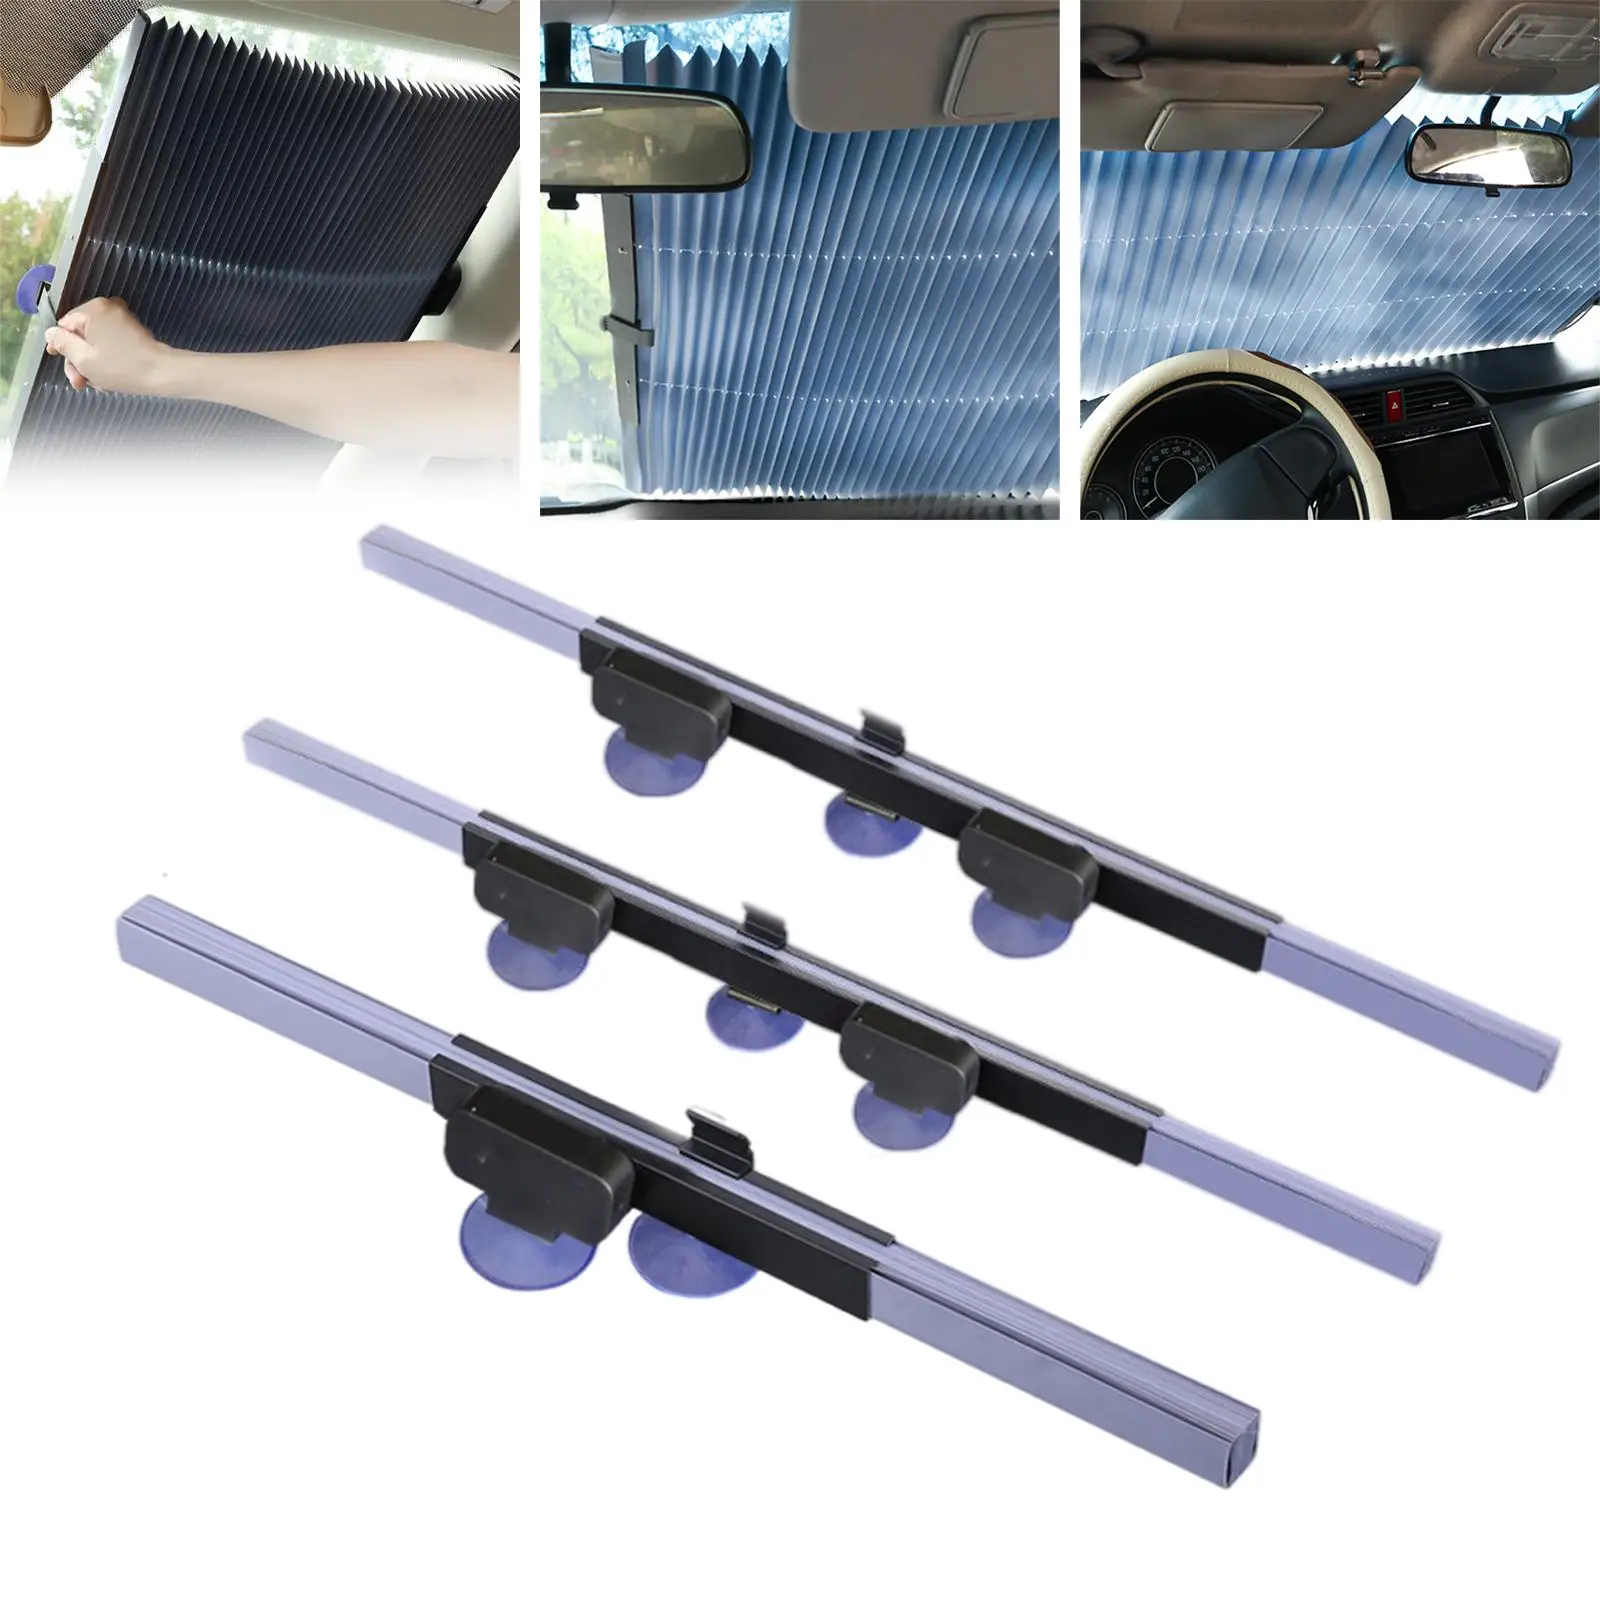 Windshield Sunshade with Suction Cups Universal for All Cars